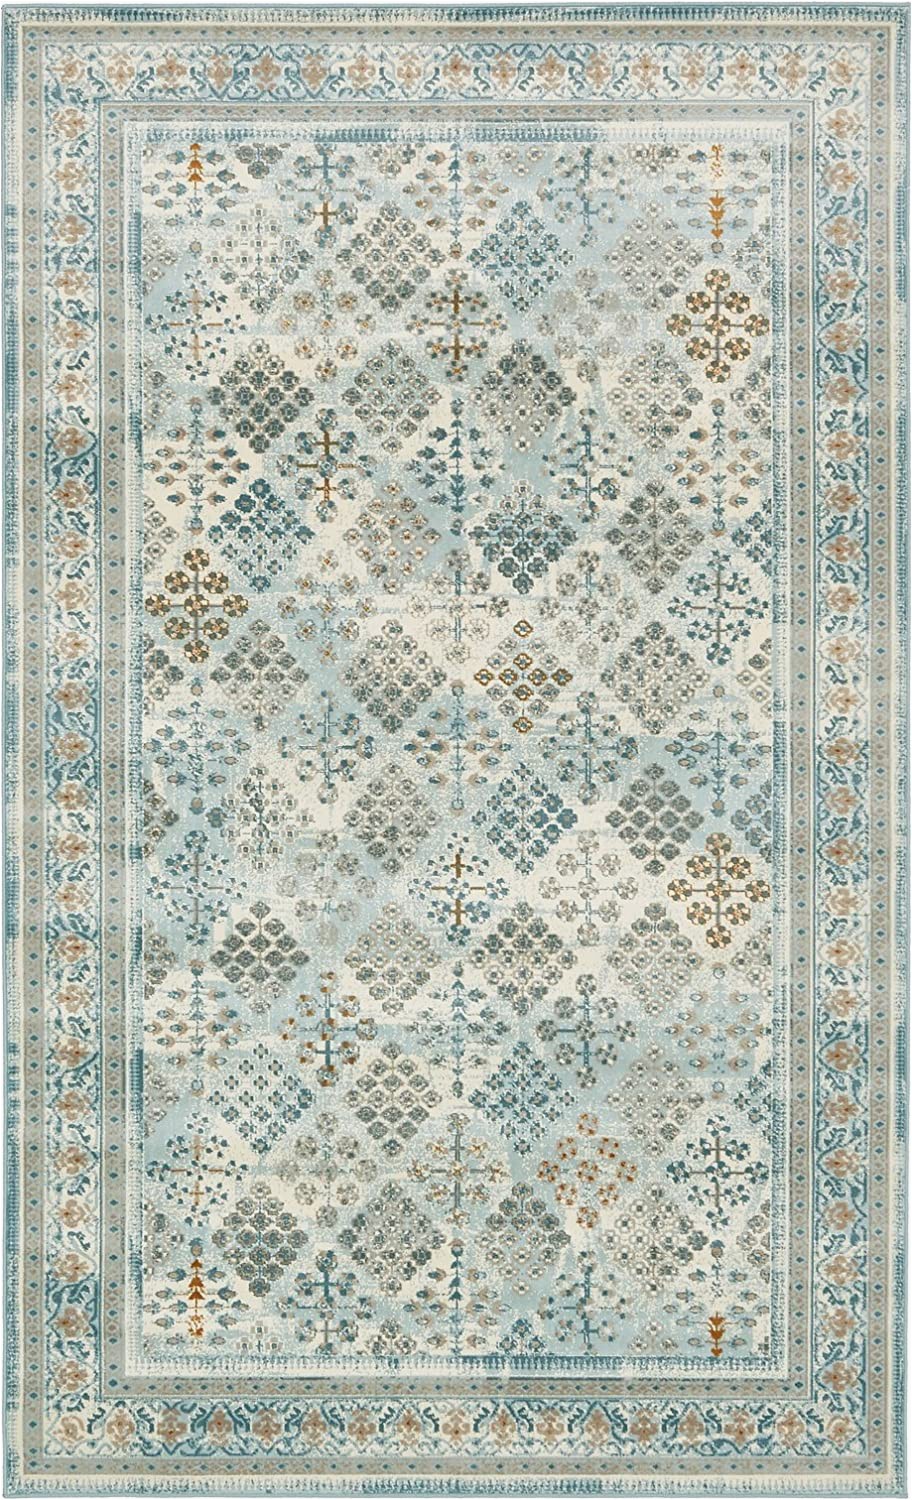 8 Foot Square area Rug area Rug Vintage Light Blue 5 X 8 Ft St John Collection Rugs Inspired Overdyed Carpet